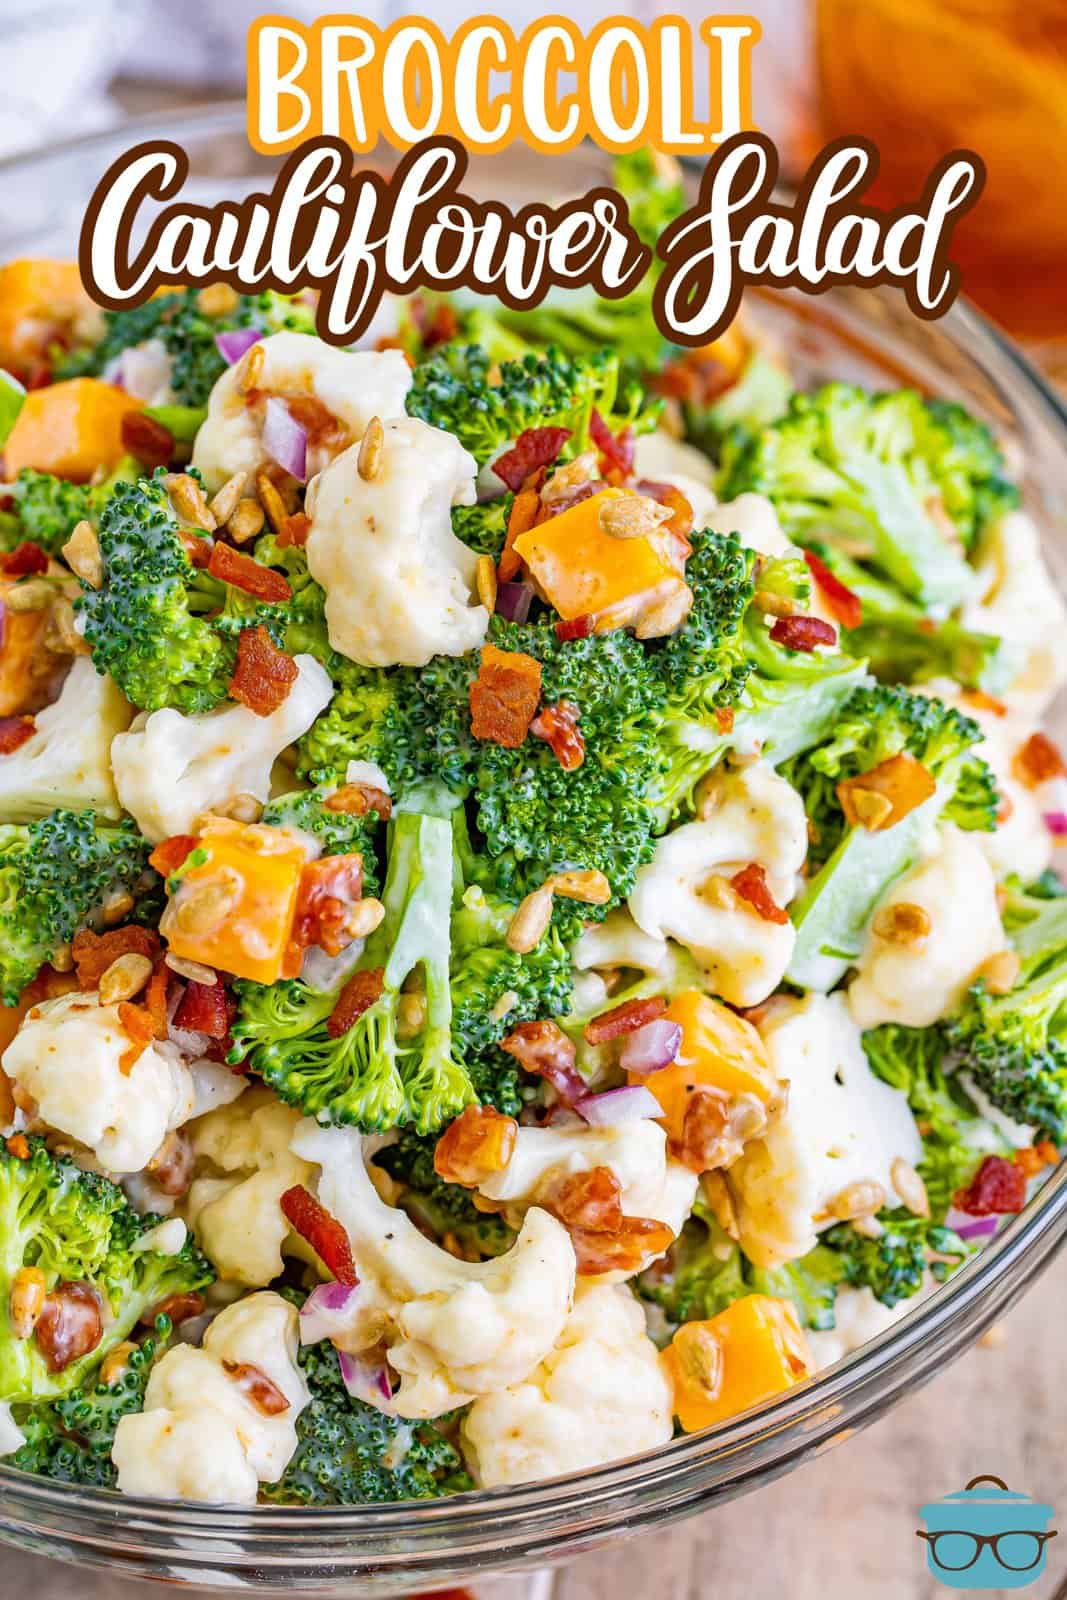 Looking down on a bowl of broccoli cauliflower salad with bacon.